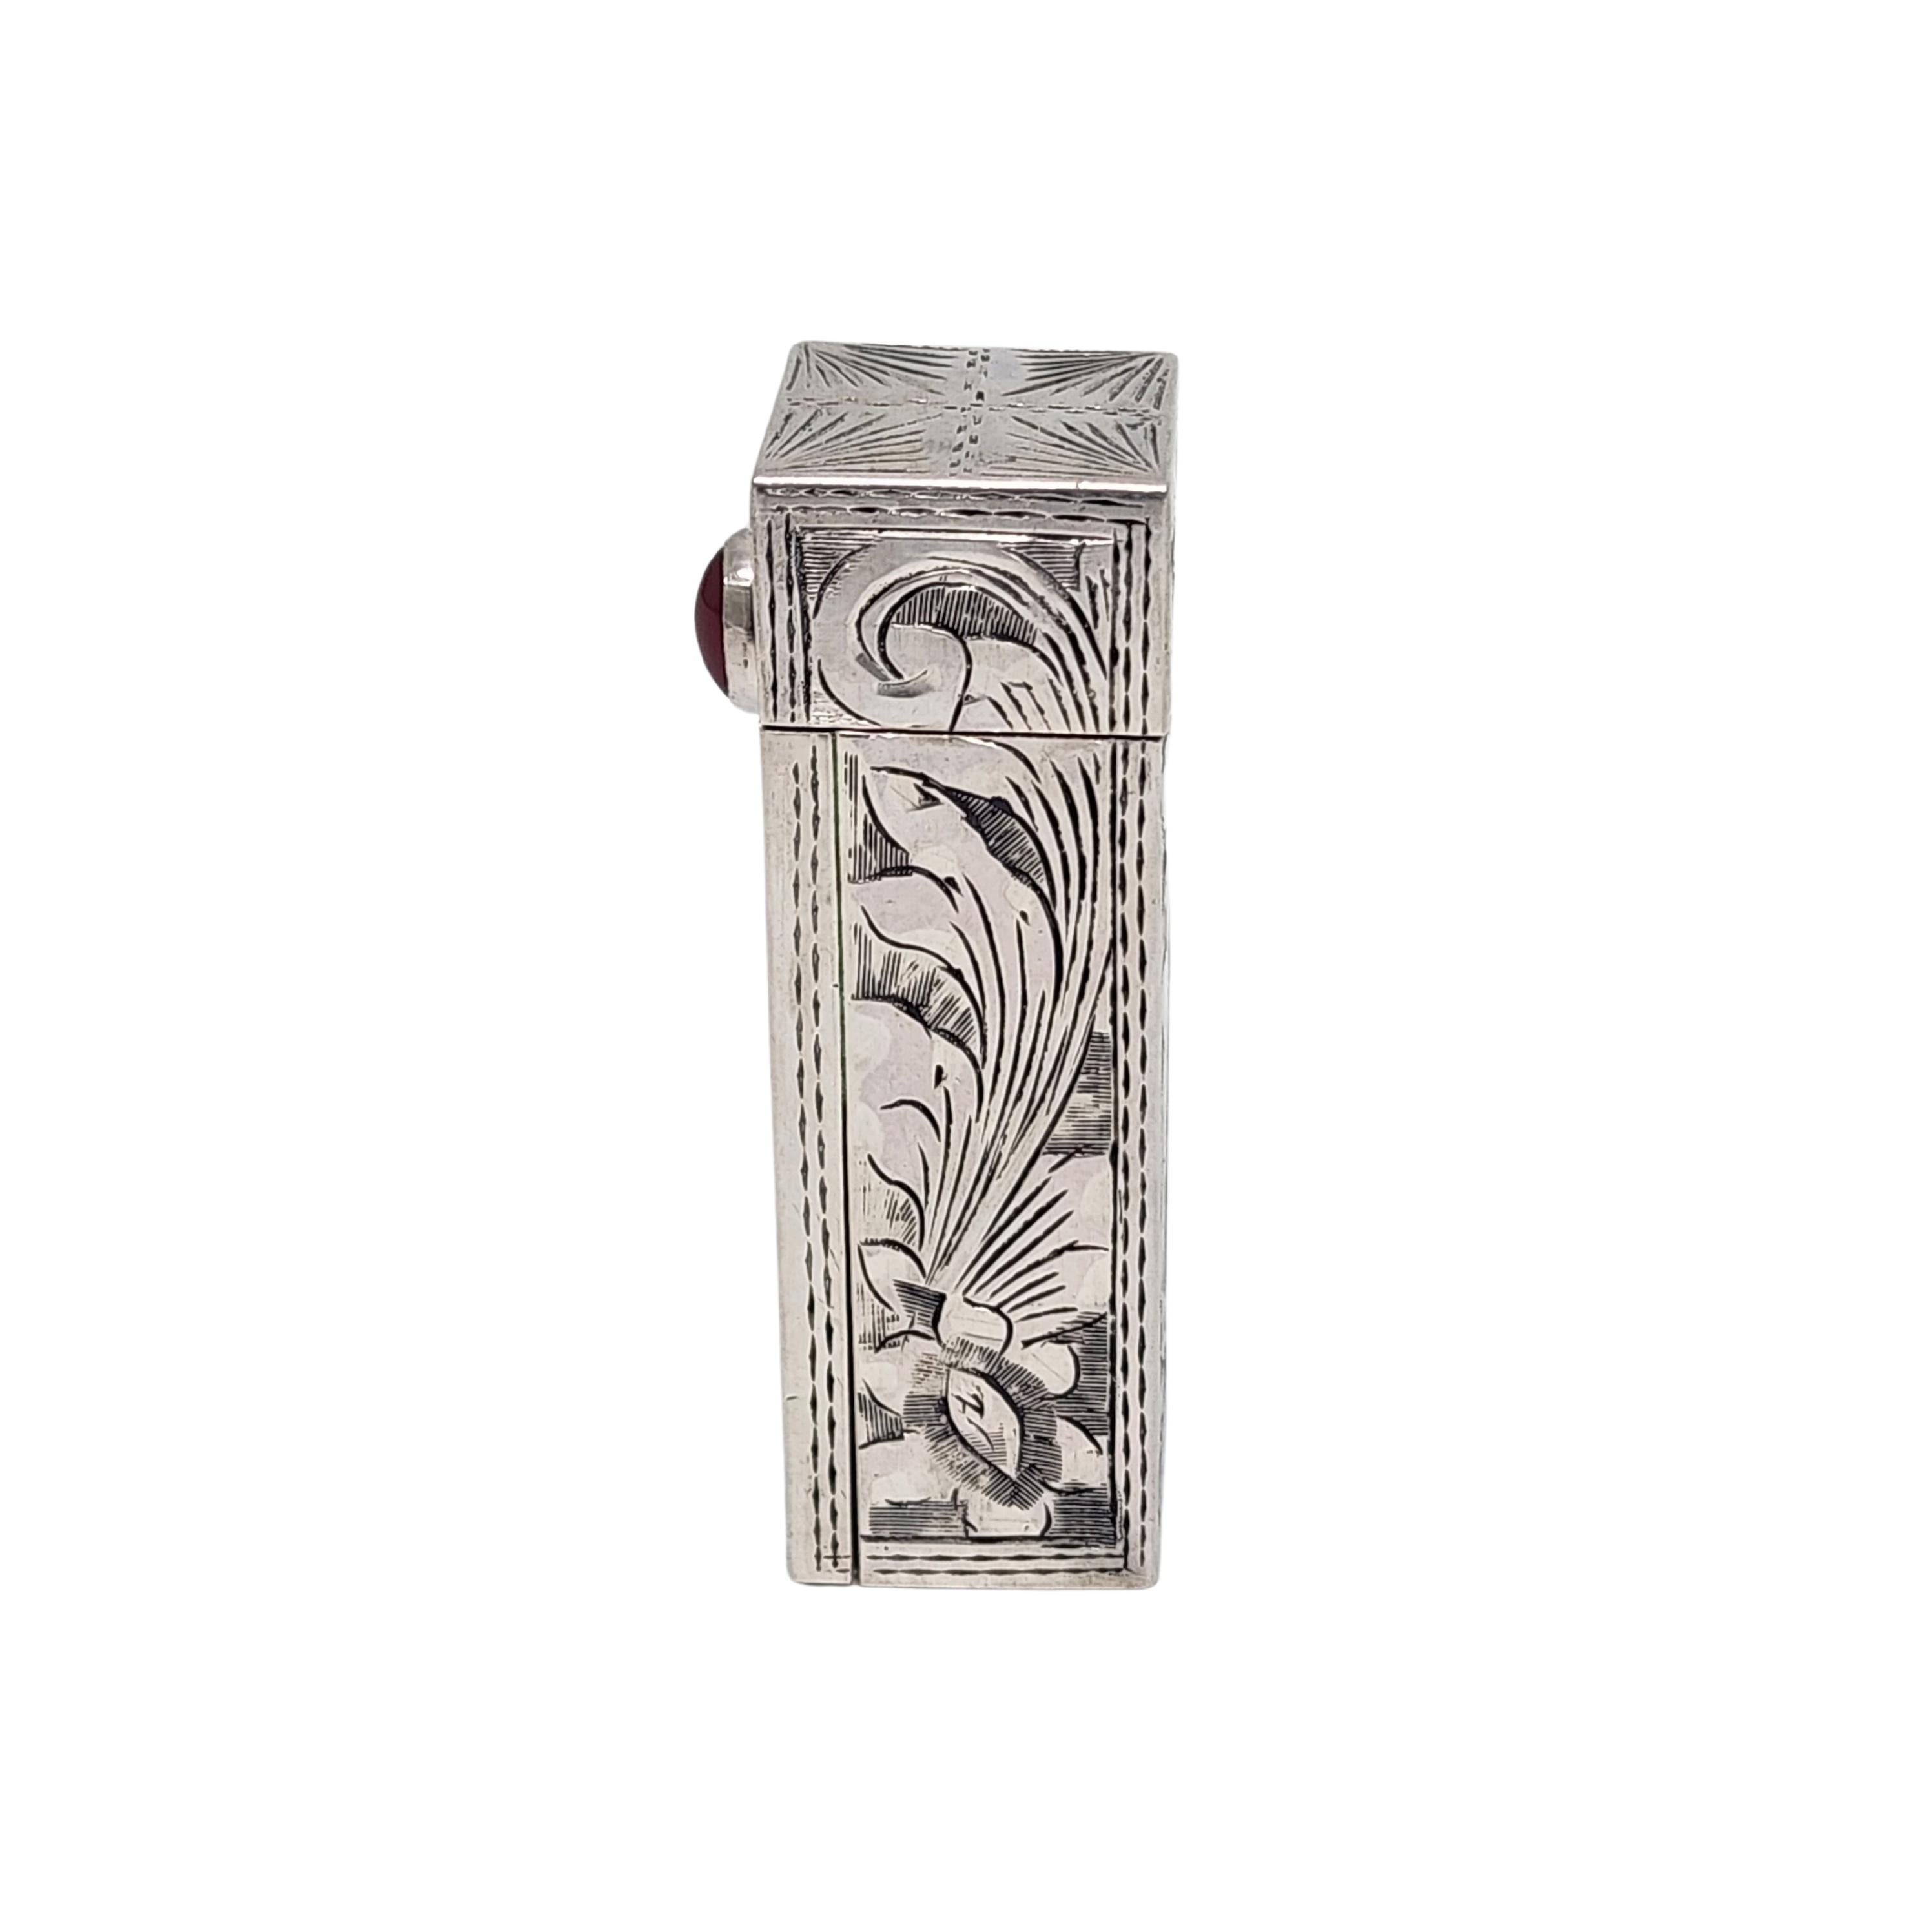 Vintage Italian 800 silver mirror lipstick case with red stone.

An etched flower and scroll design adorn this lipstick case that open to reveal a folding mirror. The oval red cabochon stone pushed up the lipstick and keeps the case folded when